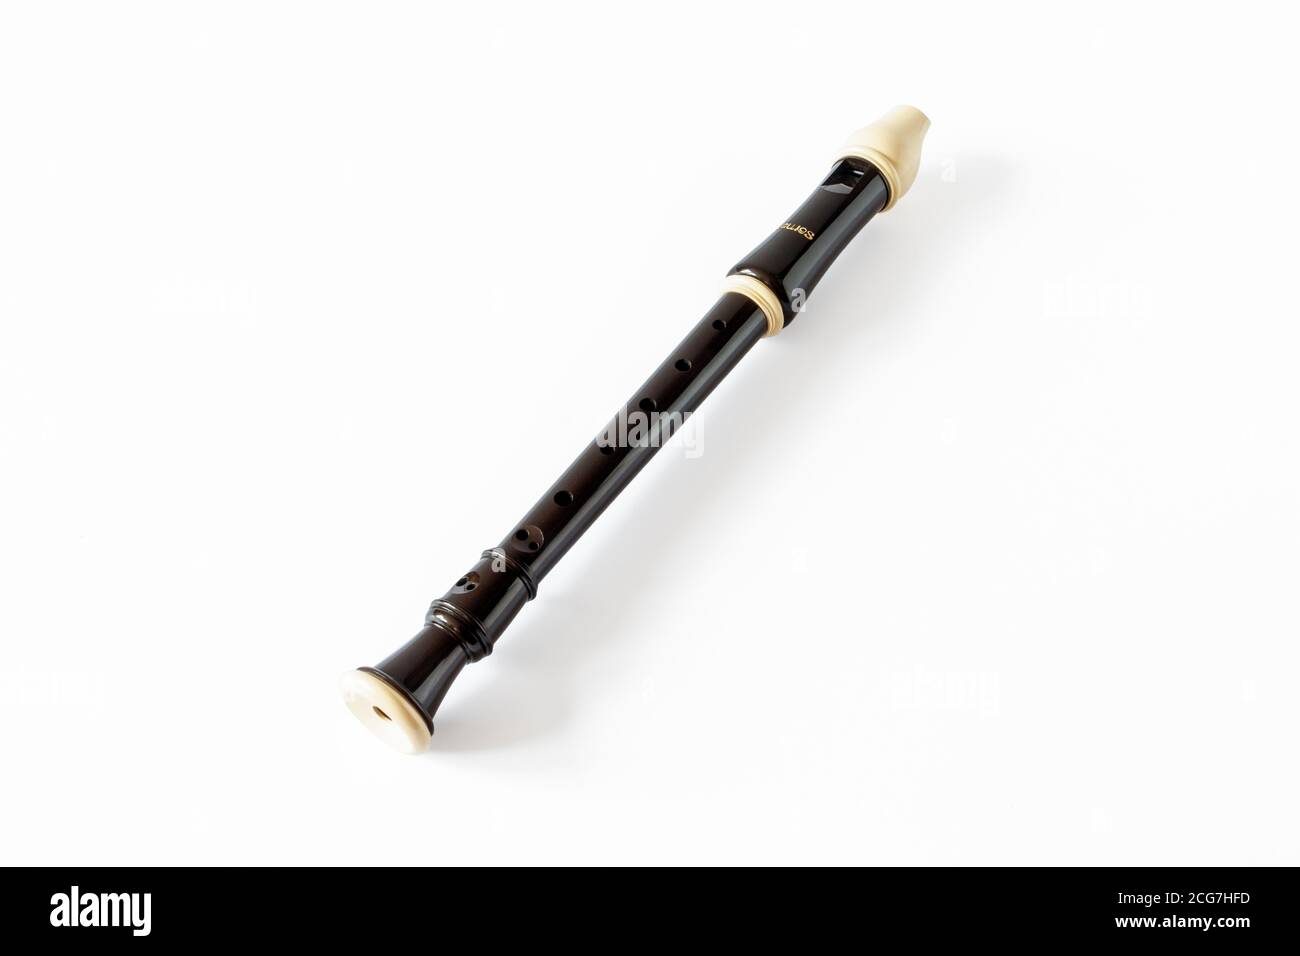 An Aulos brand plastic soprano recorder isolated on a white background Stock Photo